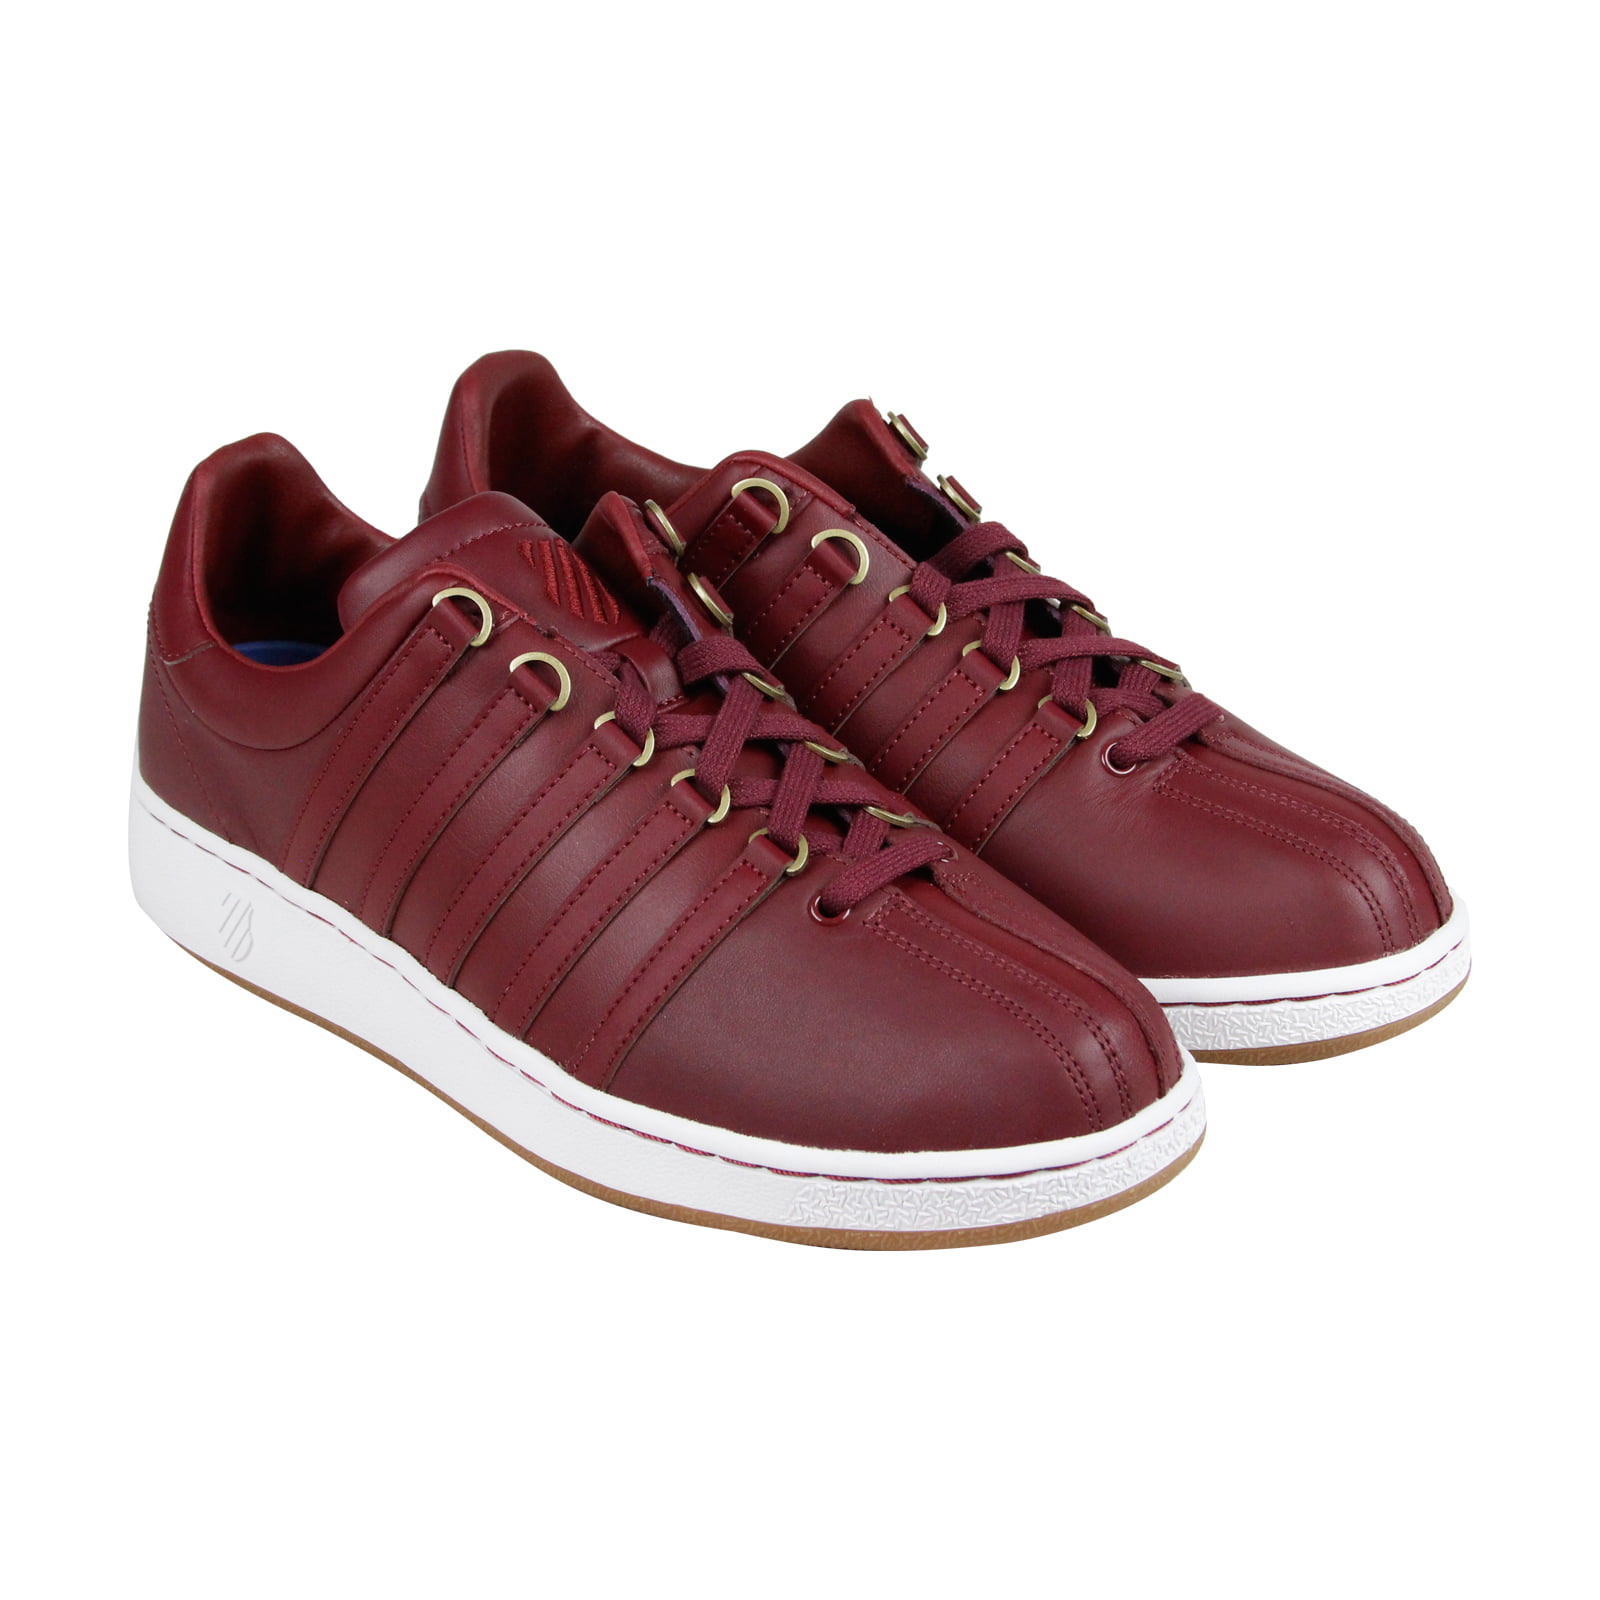 K-Swiss Classic VN Red Red Mens Sneakers Tennis Shoes Item 03343-654-M 